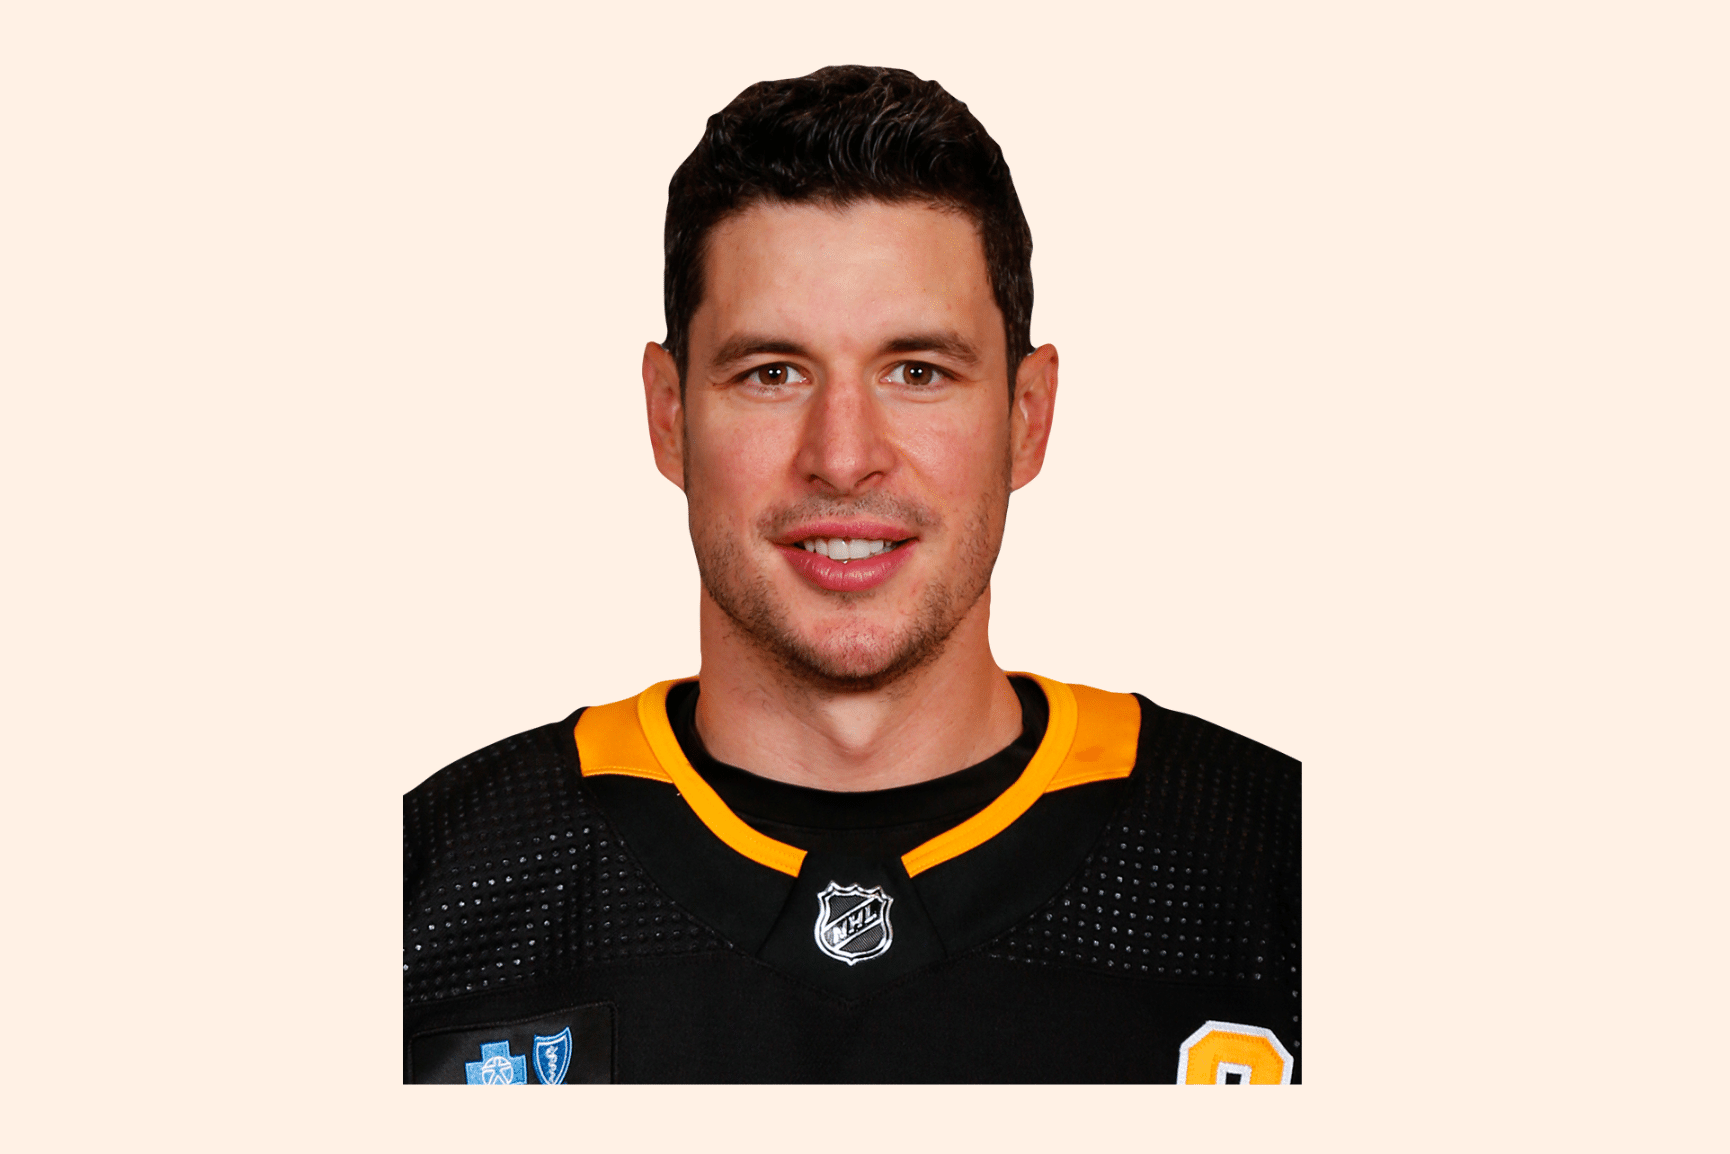 Sidney Crosby Stats: Height, Weight & Position